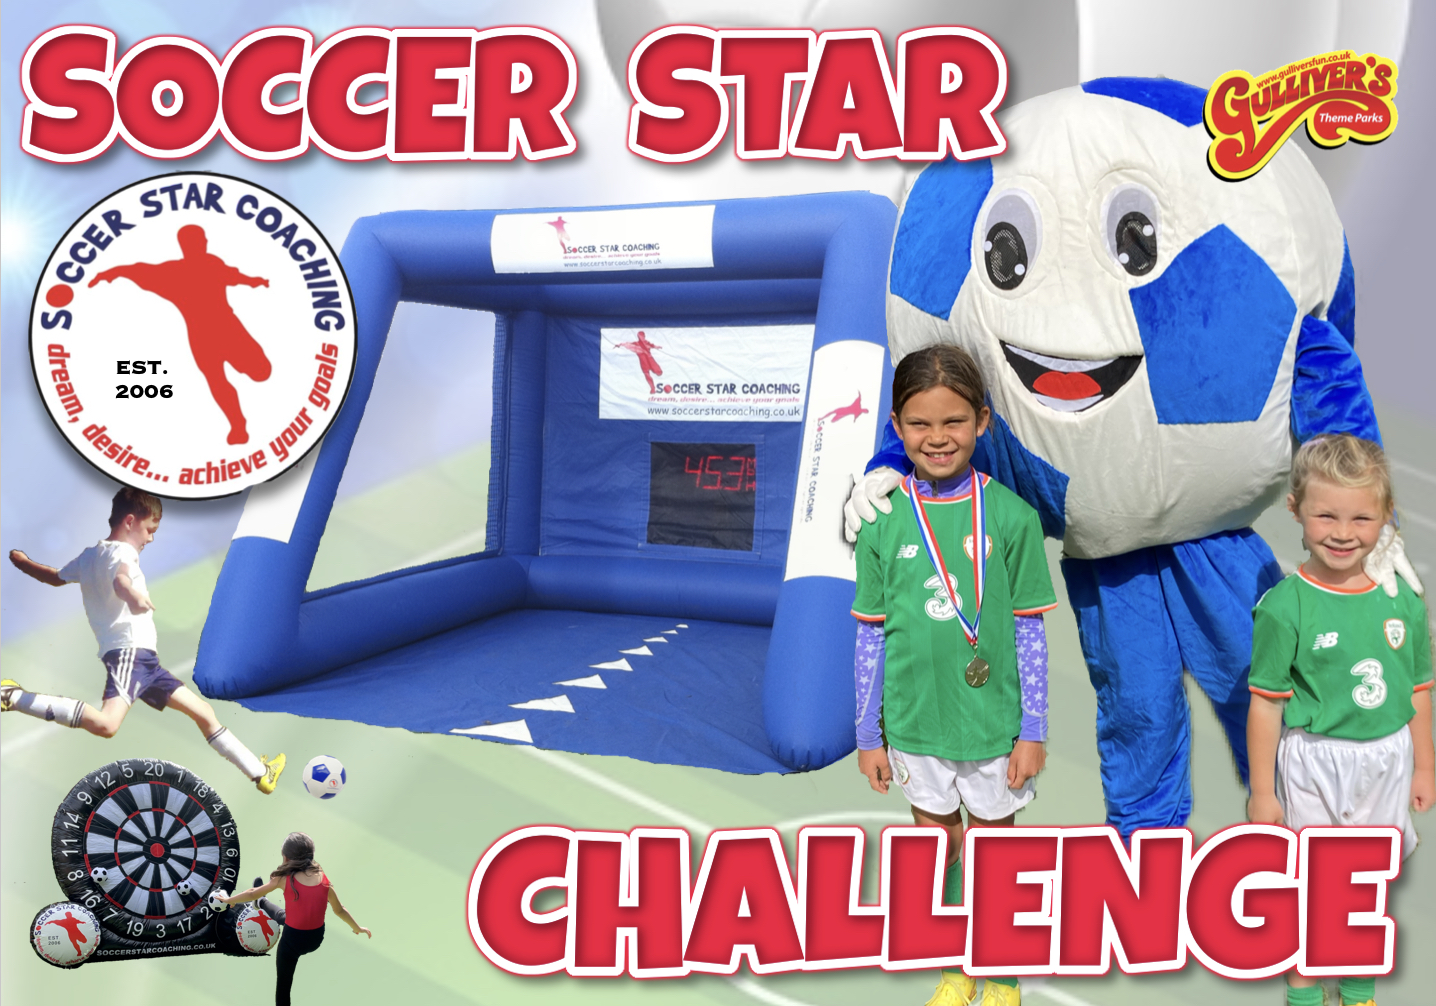 Soccer Star Challenge with Gulliver's Theme Park